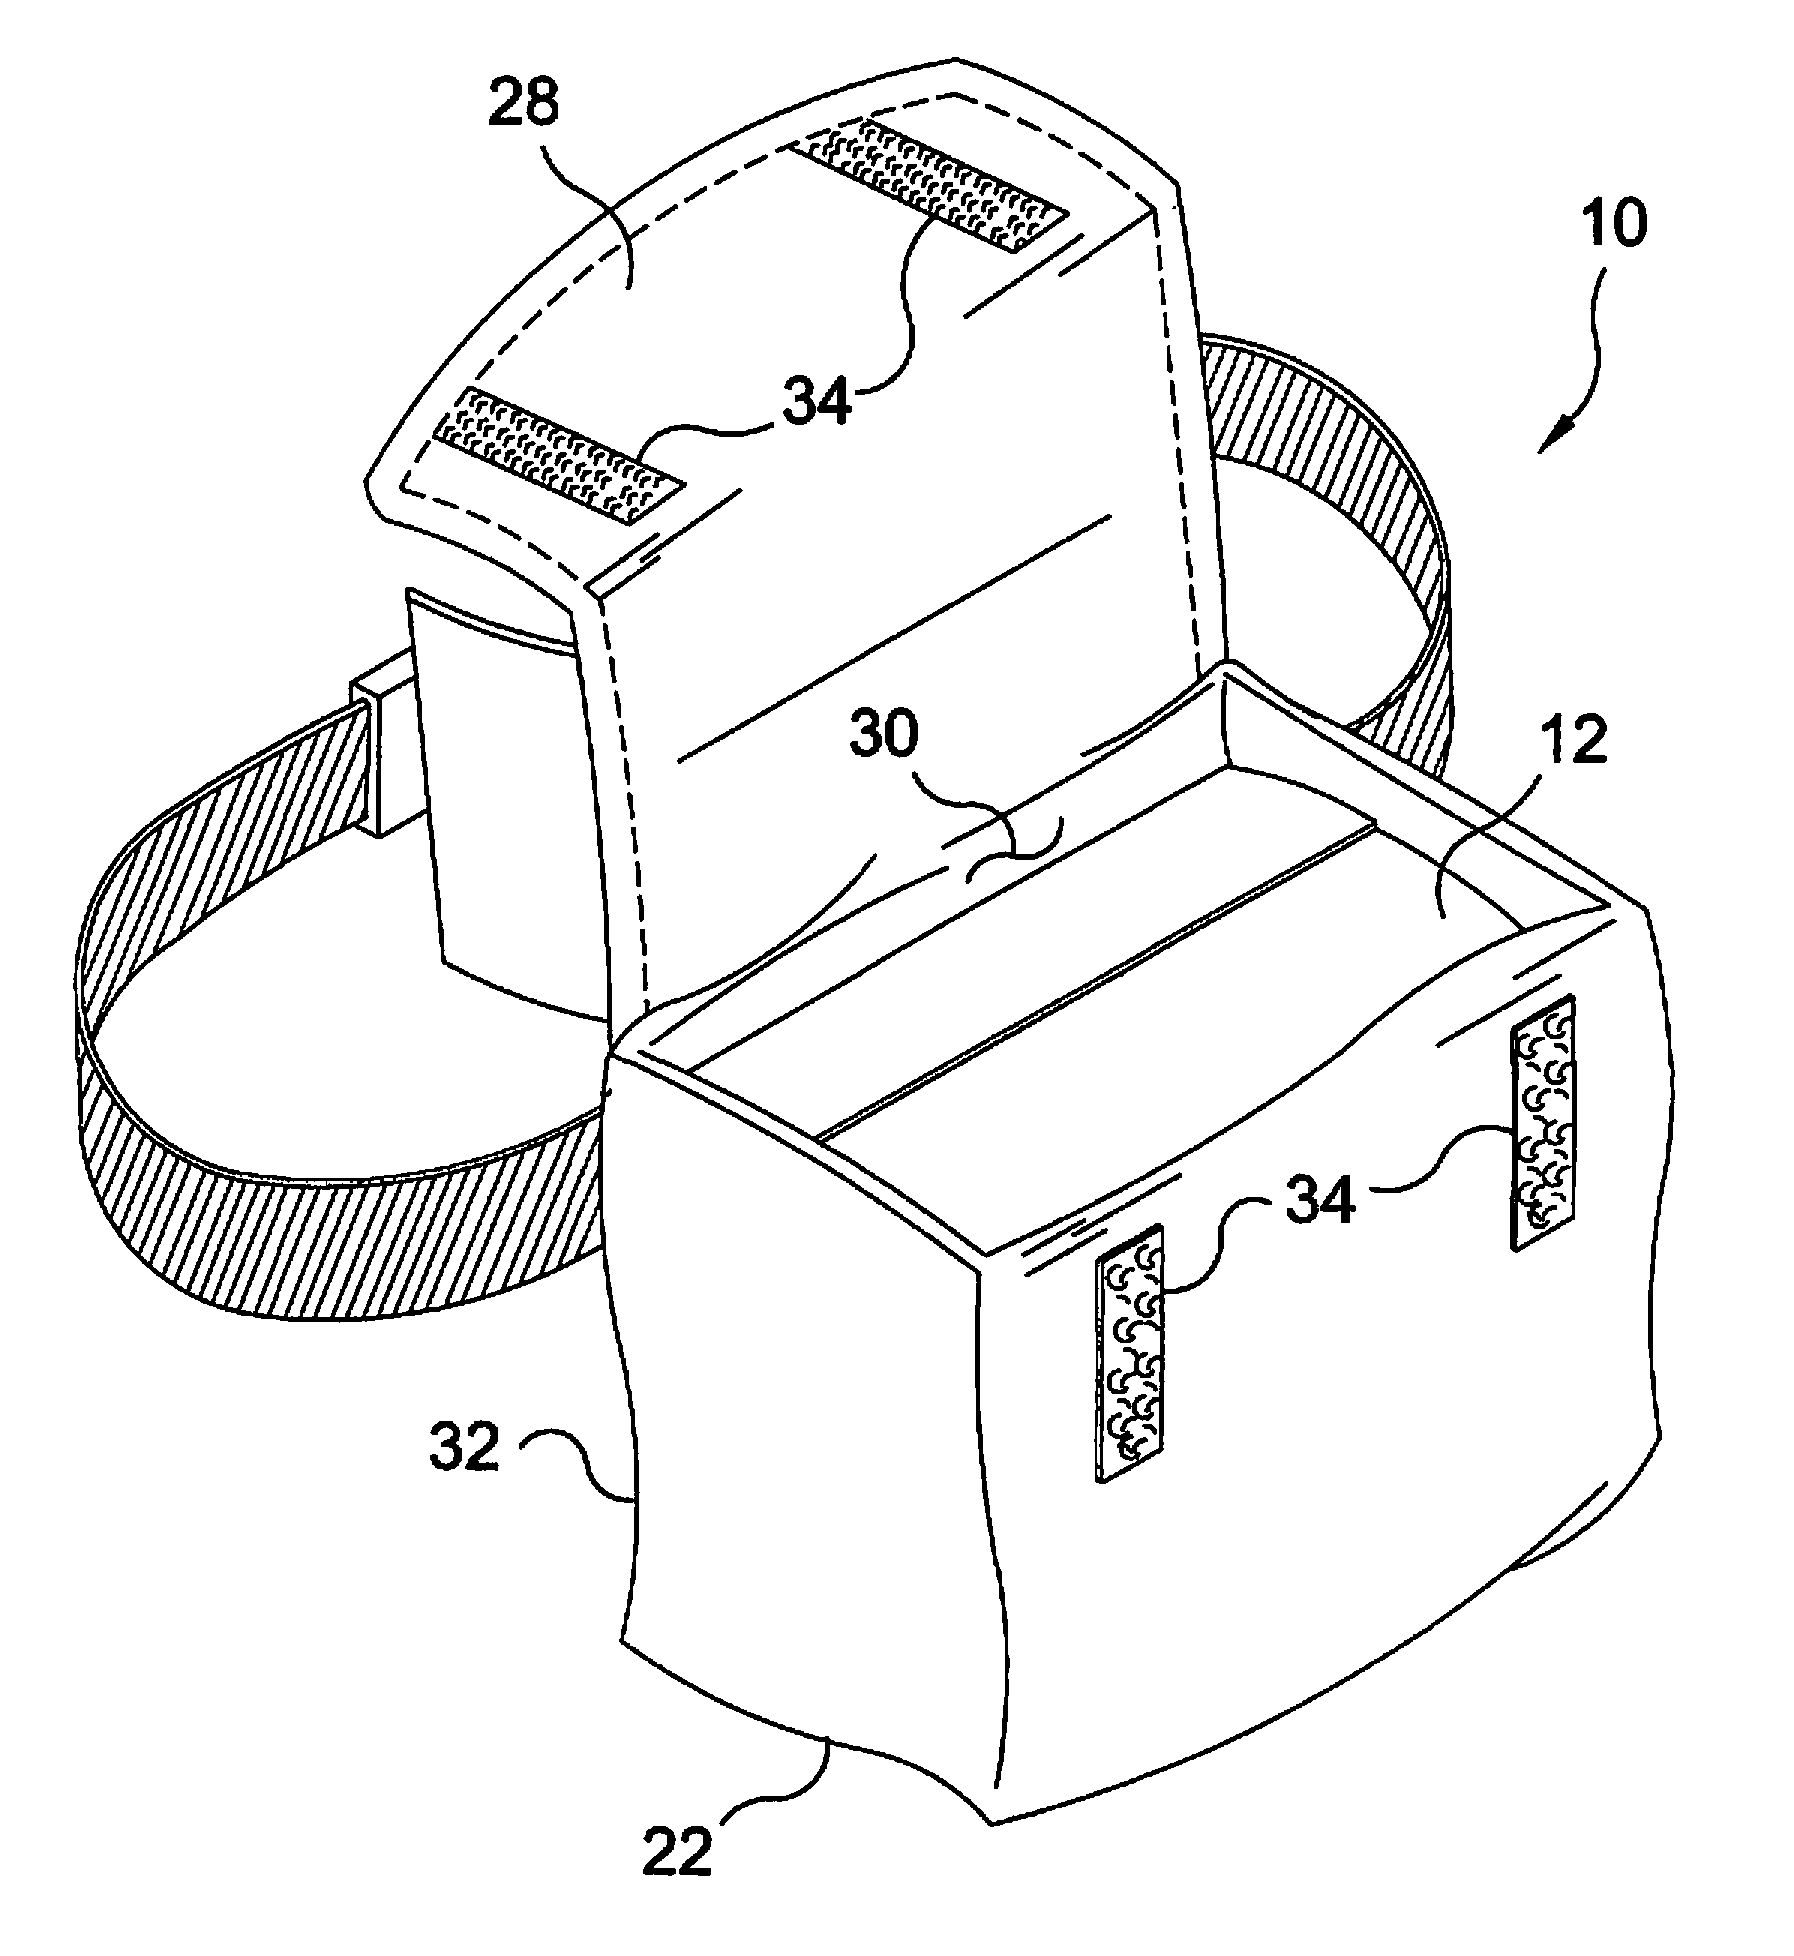 Device for using nonwoven towels in the dairy industry